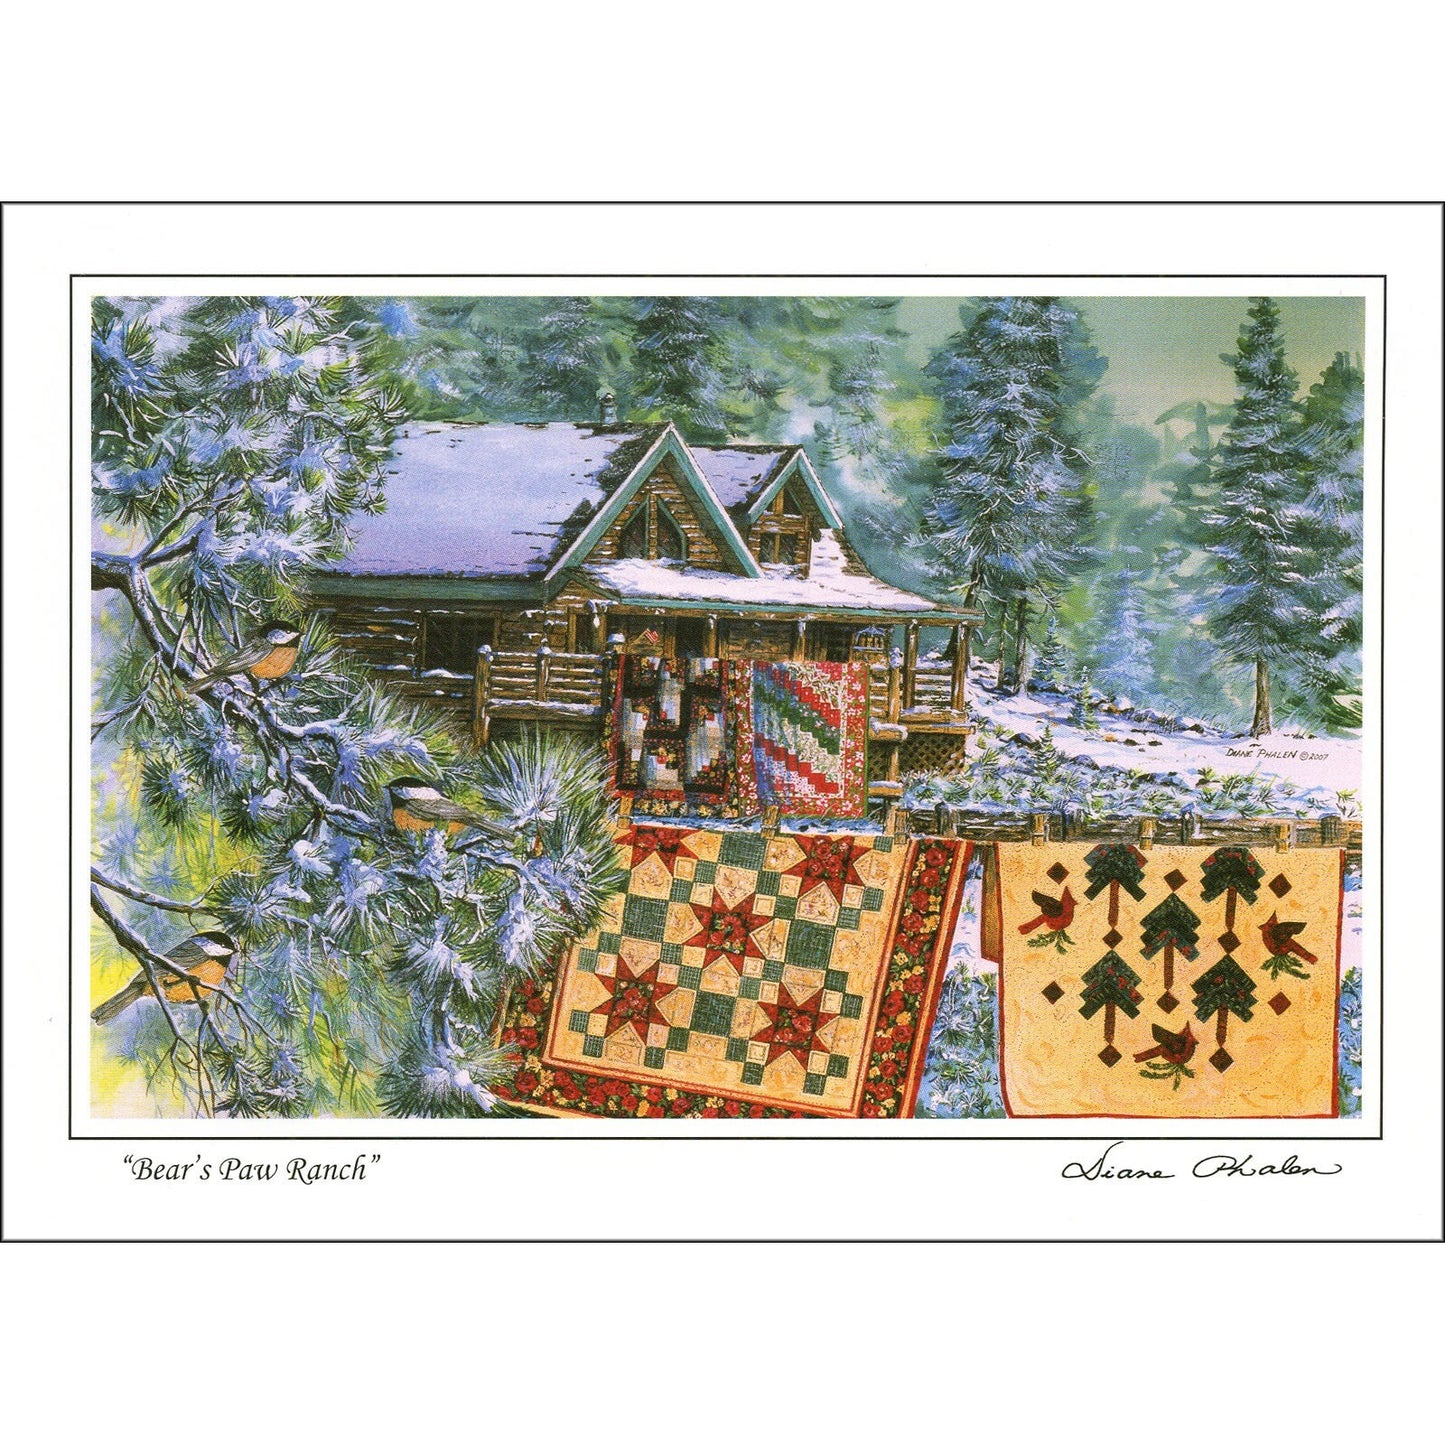 Quilt Themed 8 Note Card Set of Snow & Quilts 4 different prints by Diane Phalen Watercolors